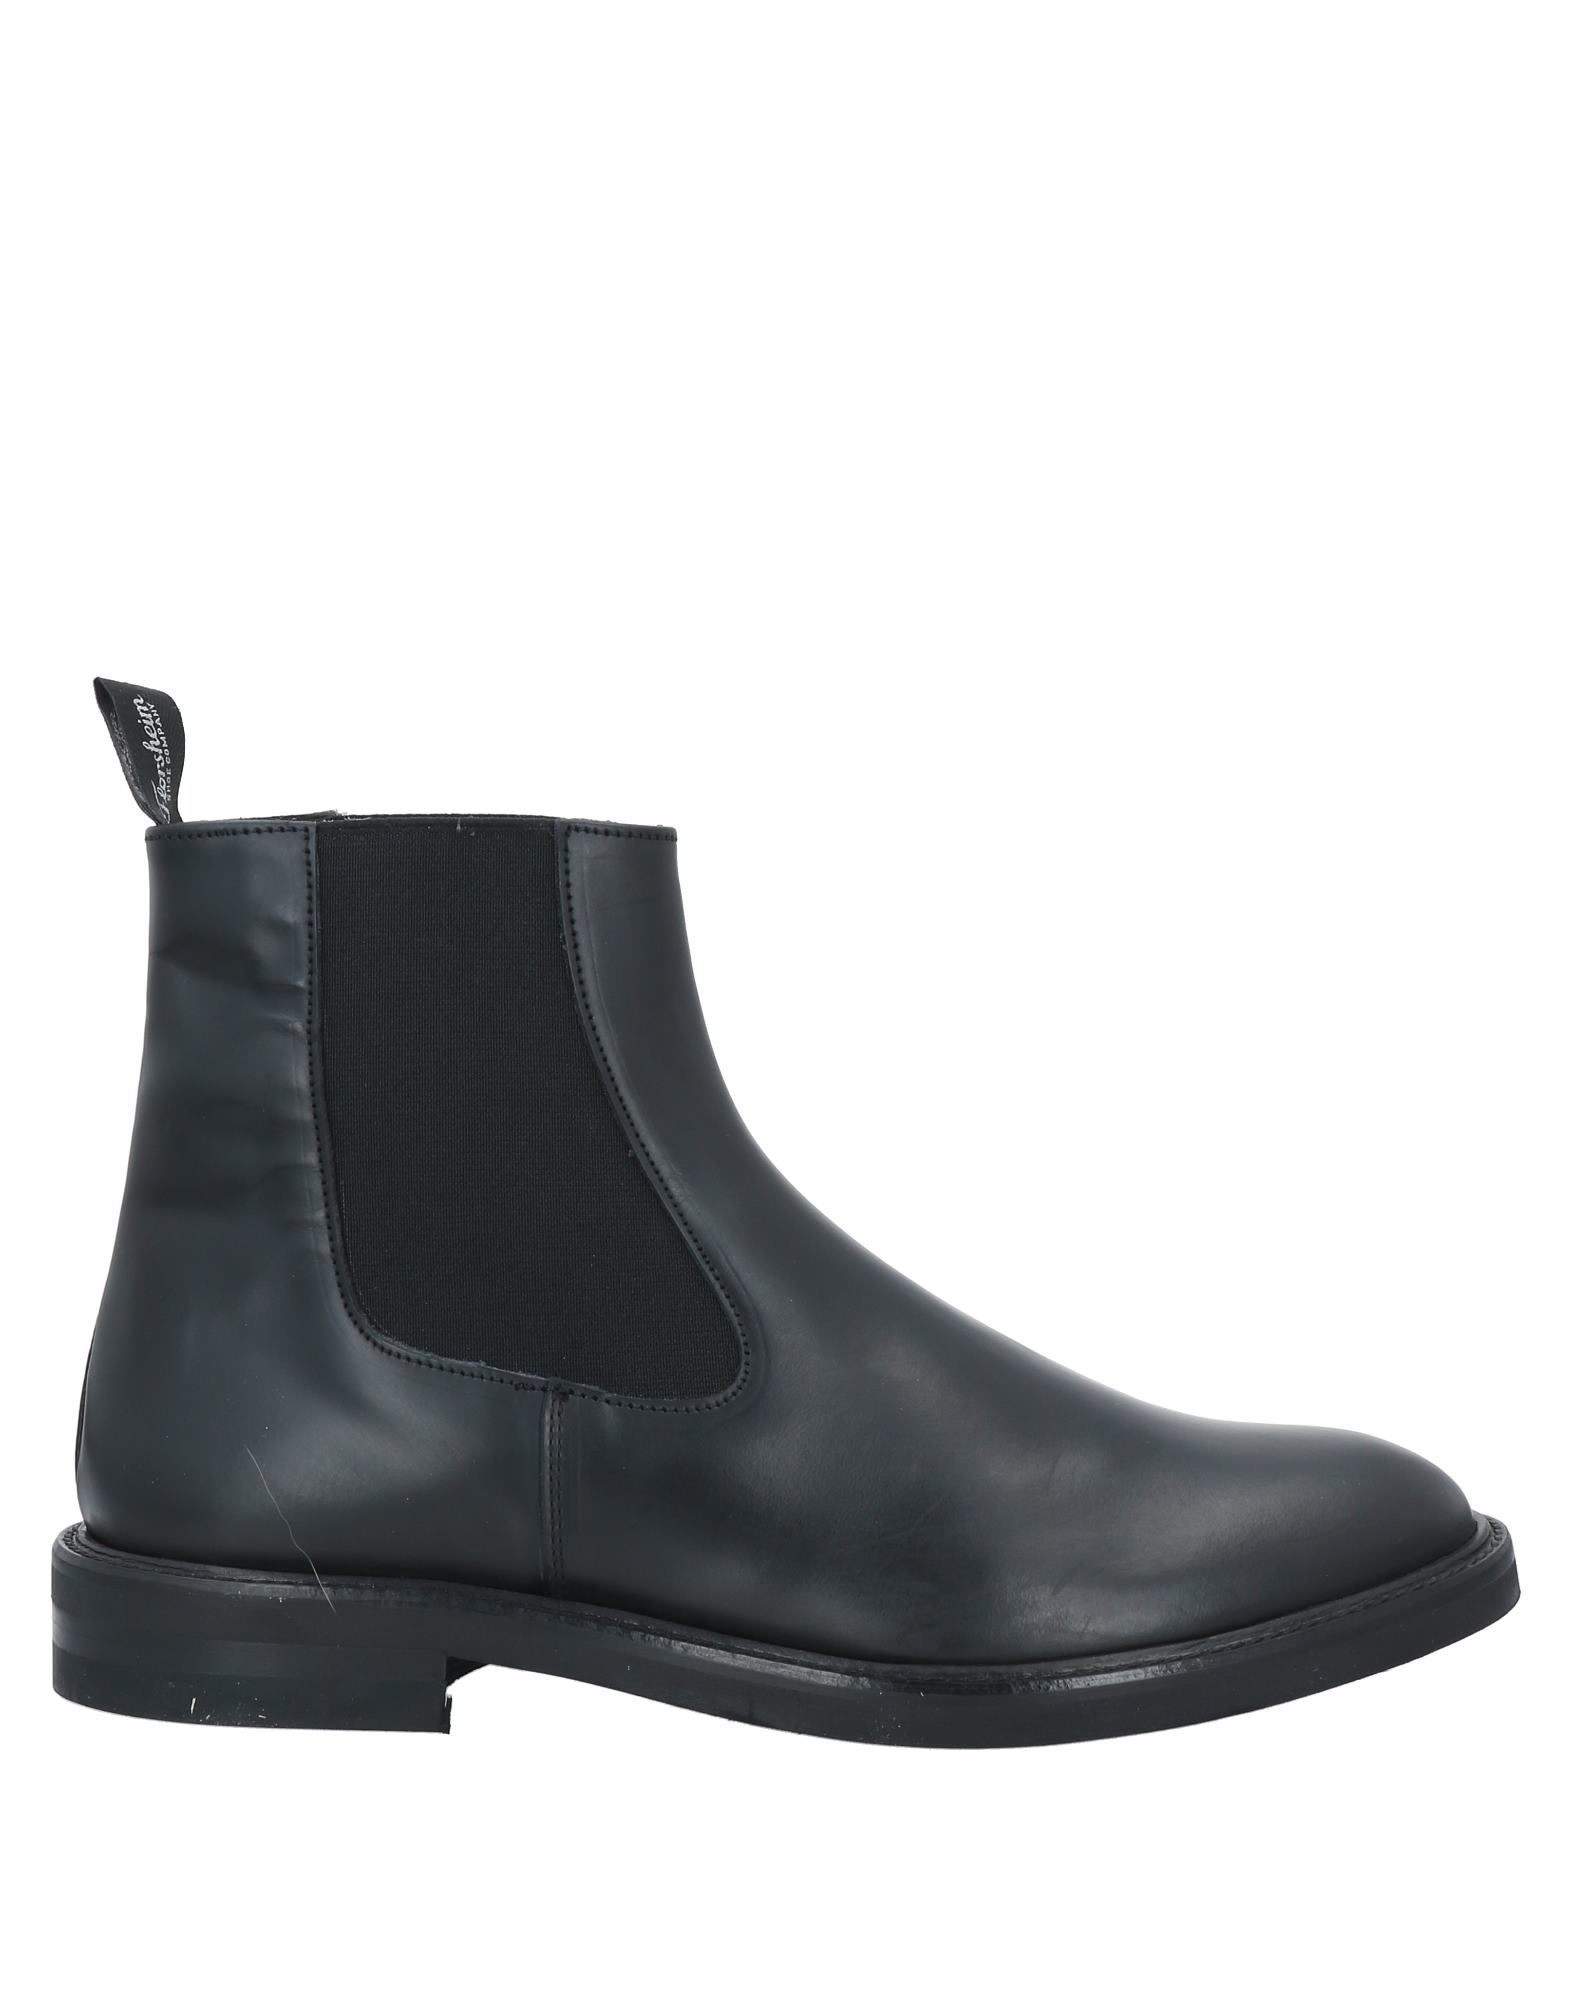 FLORSHEIM IMPERIAL Ankle boots